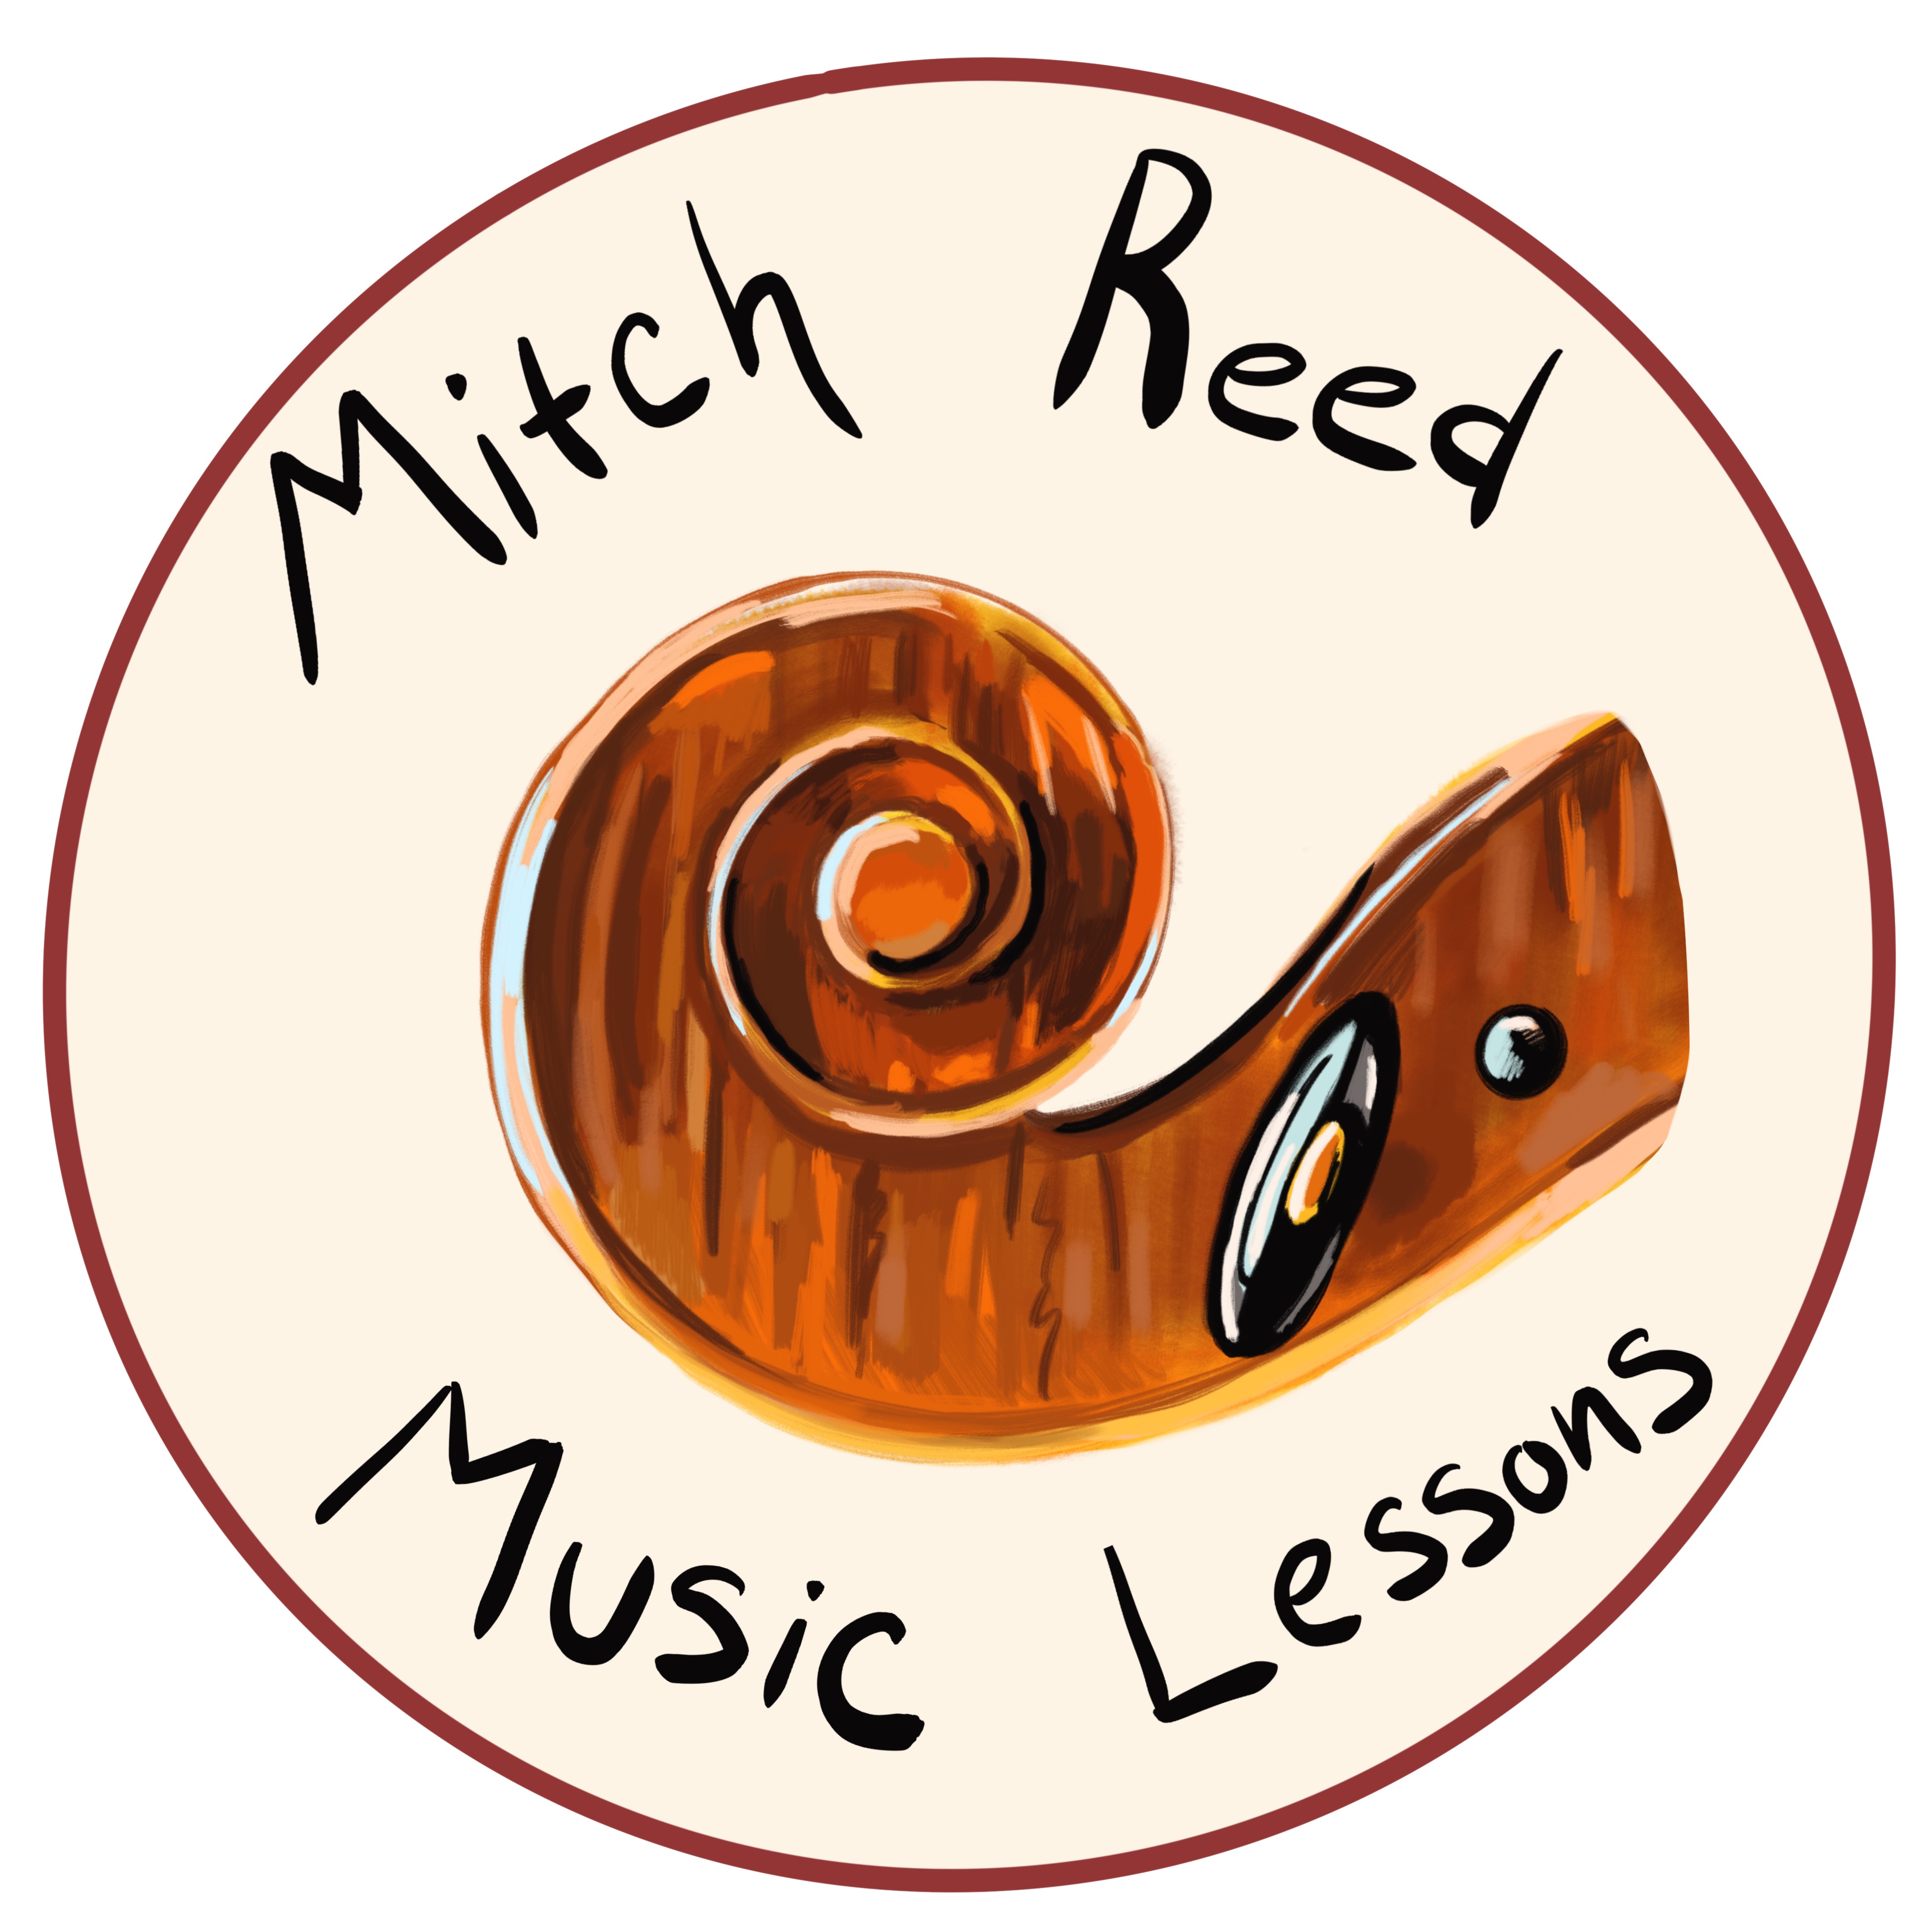 Mitch Reed Music Lessons Podcast